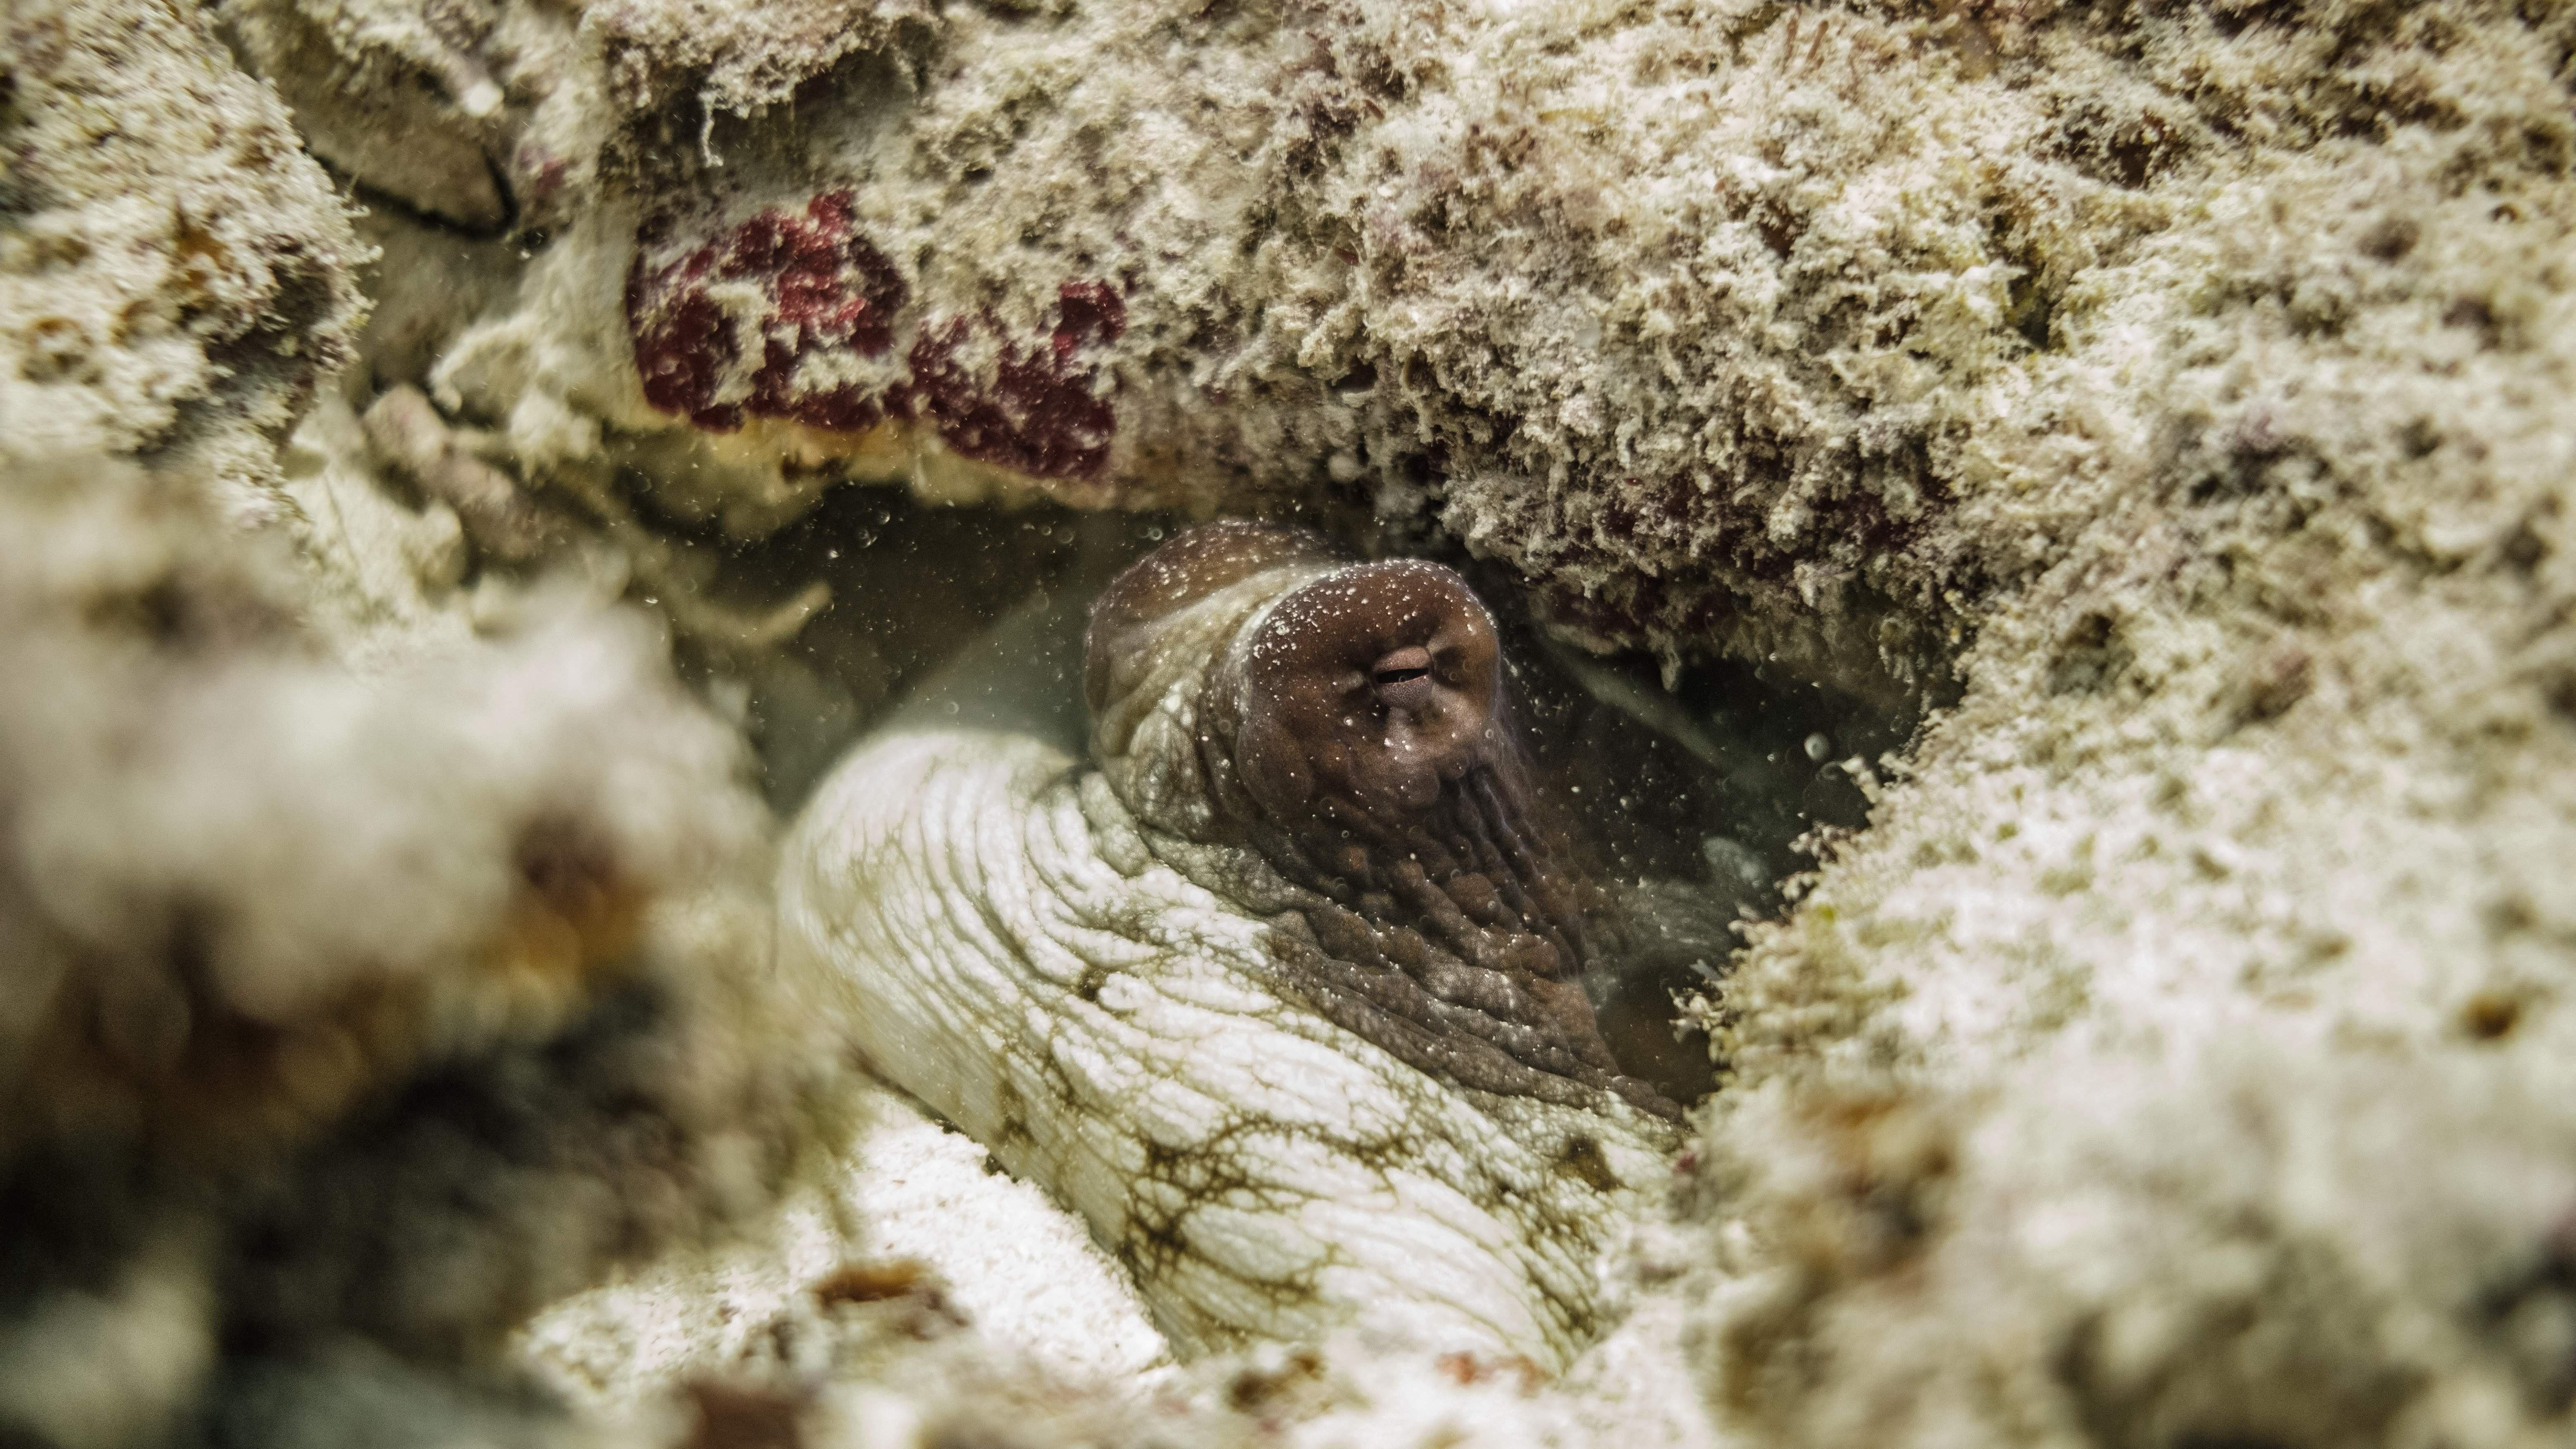 An octopus peering out from amid some rocks. (Photo: Sumy Sadurni / AFP, Getty Images)